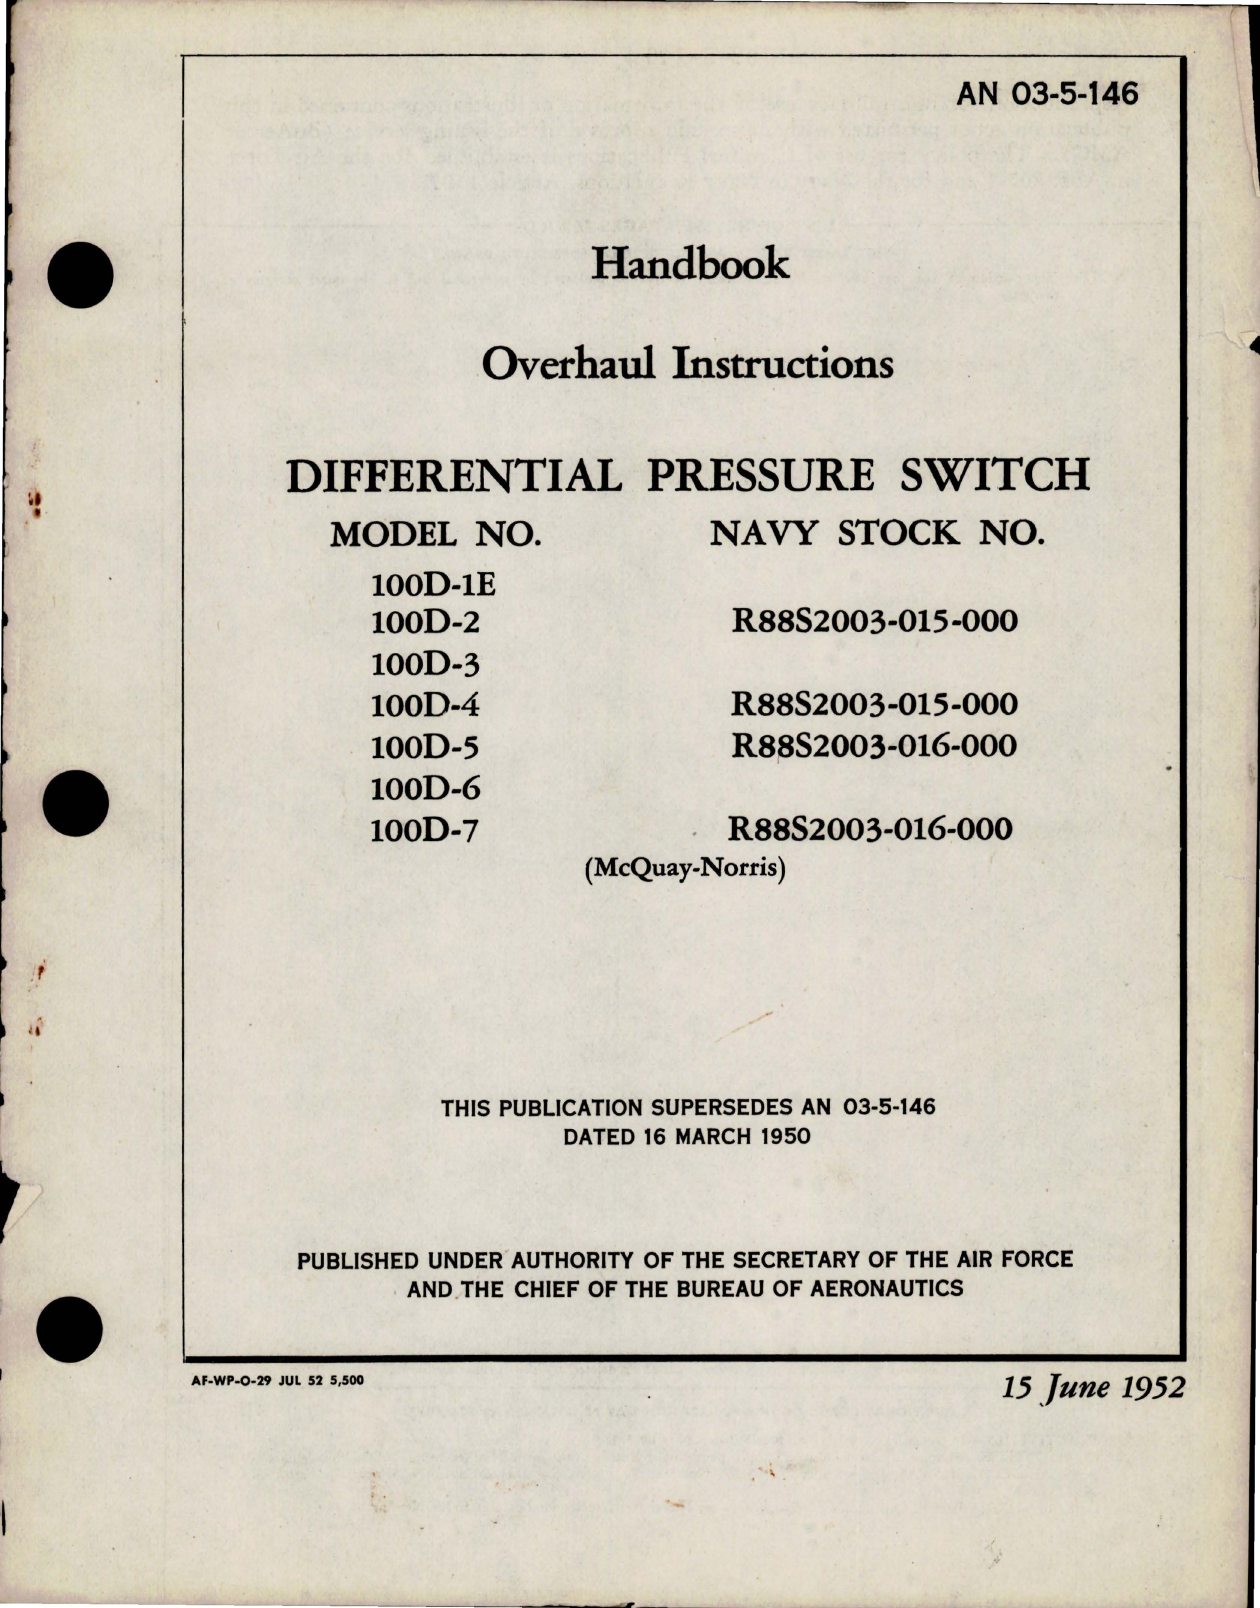 Sample page 1 from AirCorps Library document: Overhaul Instructions for Differential Pressure Switch - Model 100D Series 